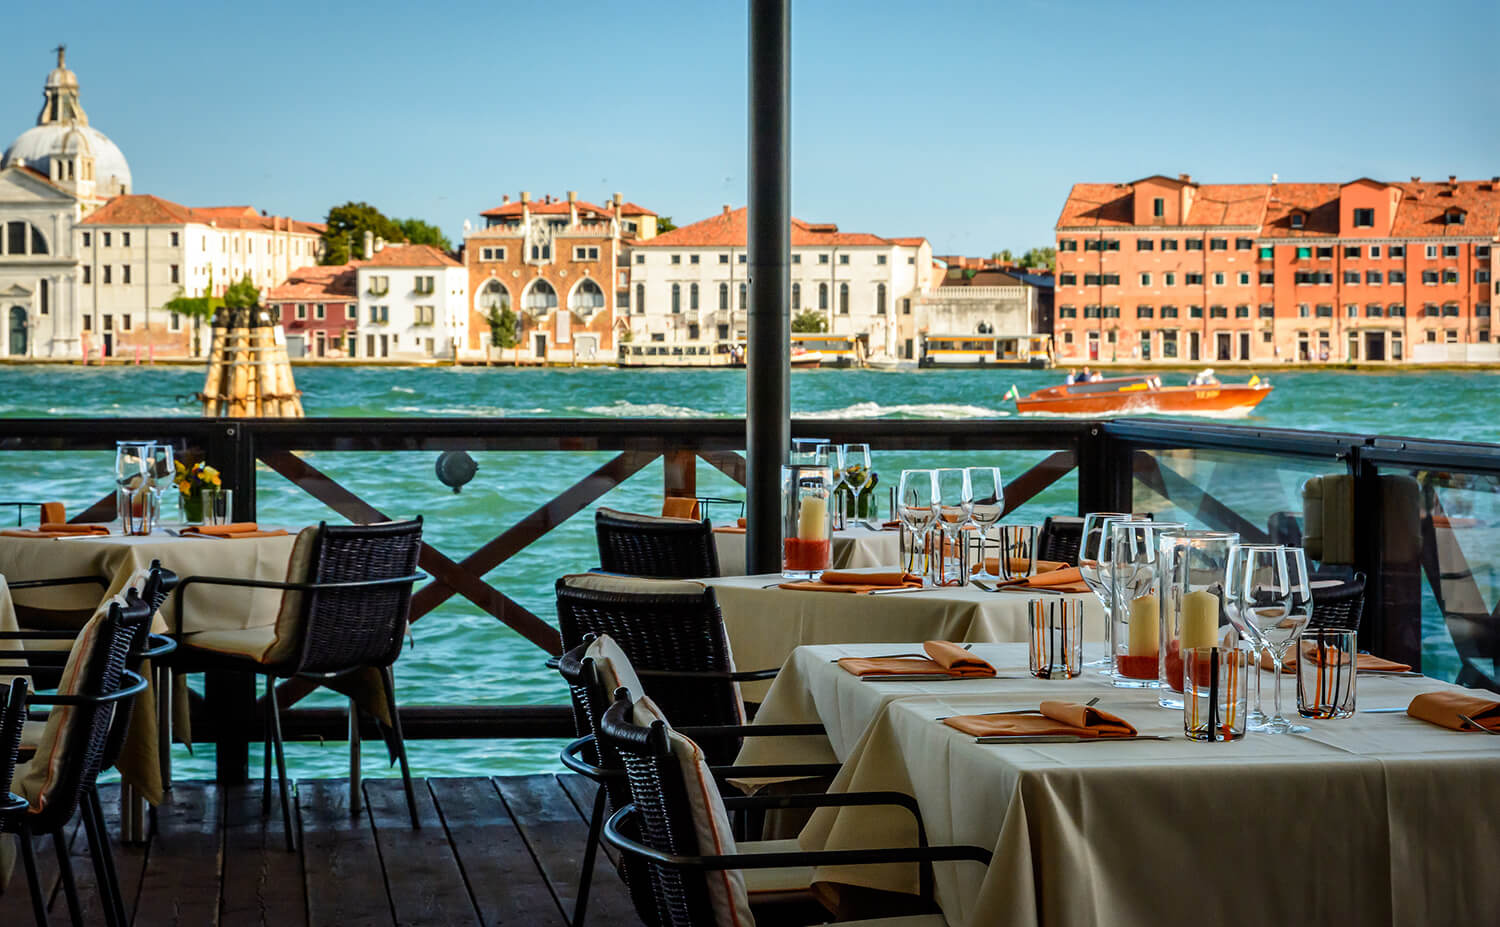 What Is The Best Restaurant In Venice Italy | lifescienceglobal.com reasonable restaurants in lahore